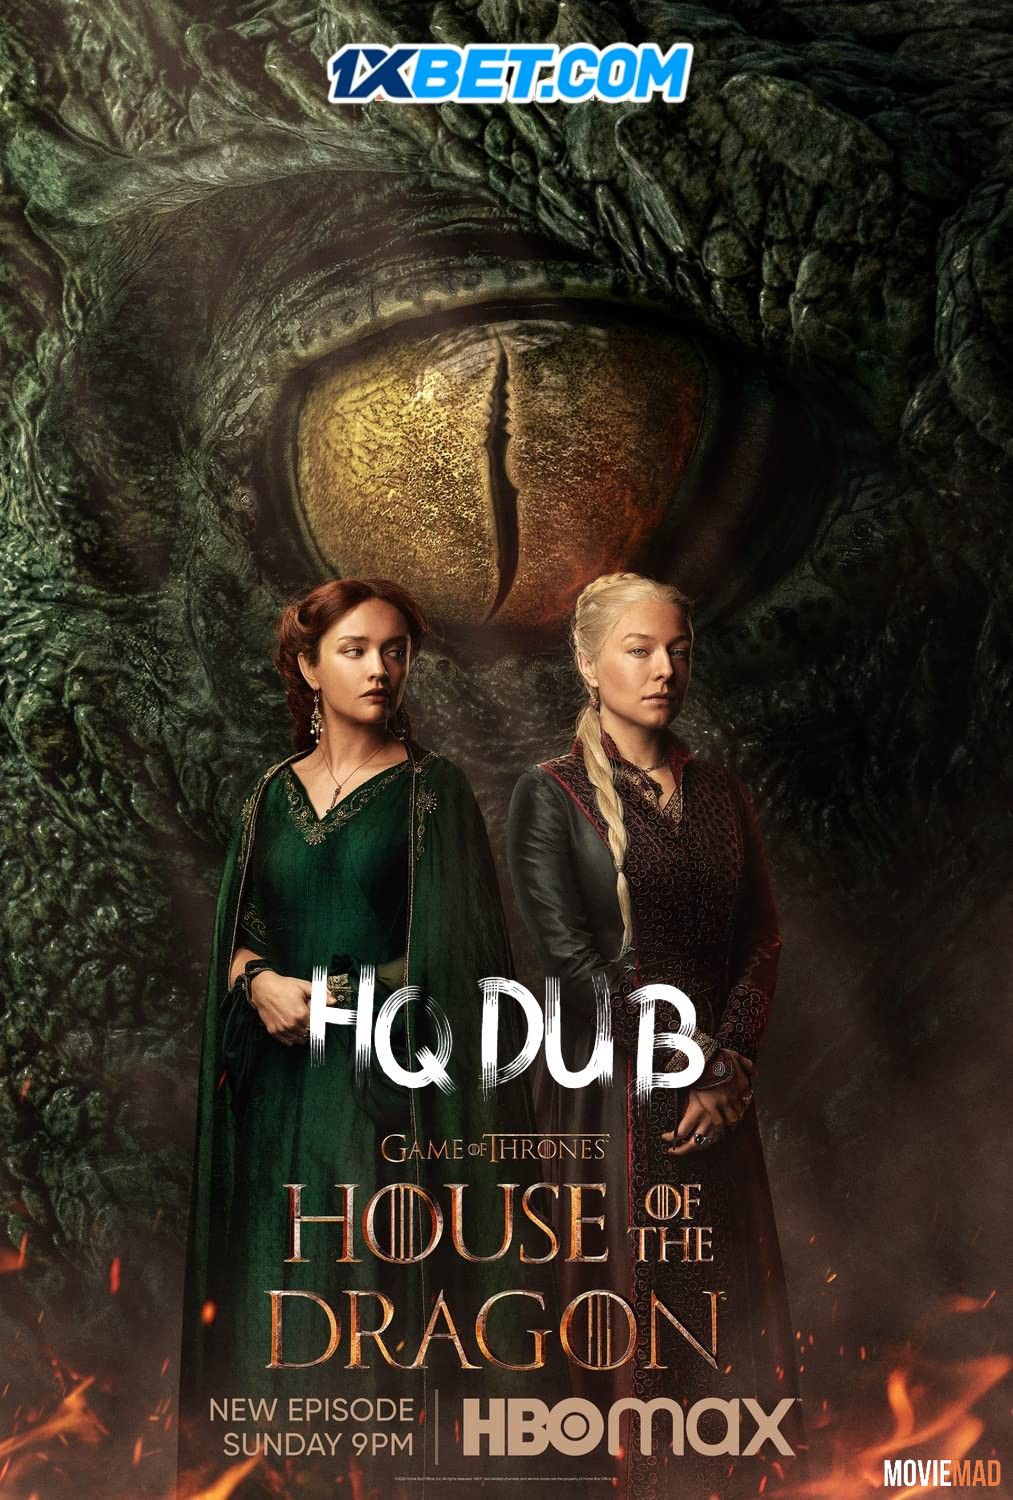 full moviesHouse Of The Dragon S01E08 (2022) Hindi (Voice Over) Dubbed HBOMAX HDRip 1080p 720p 480p